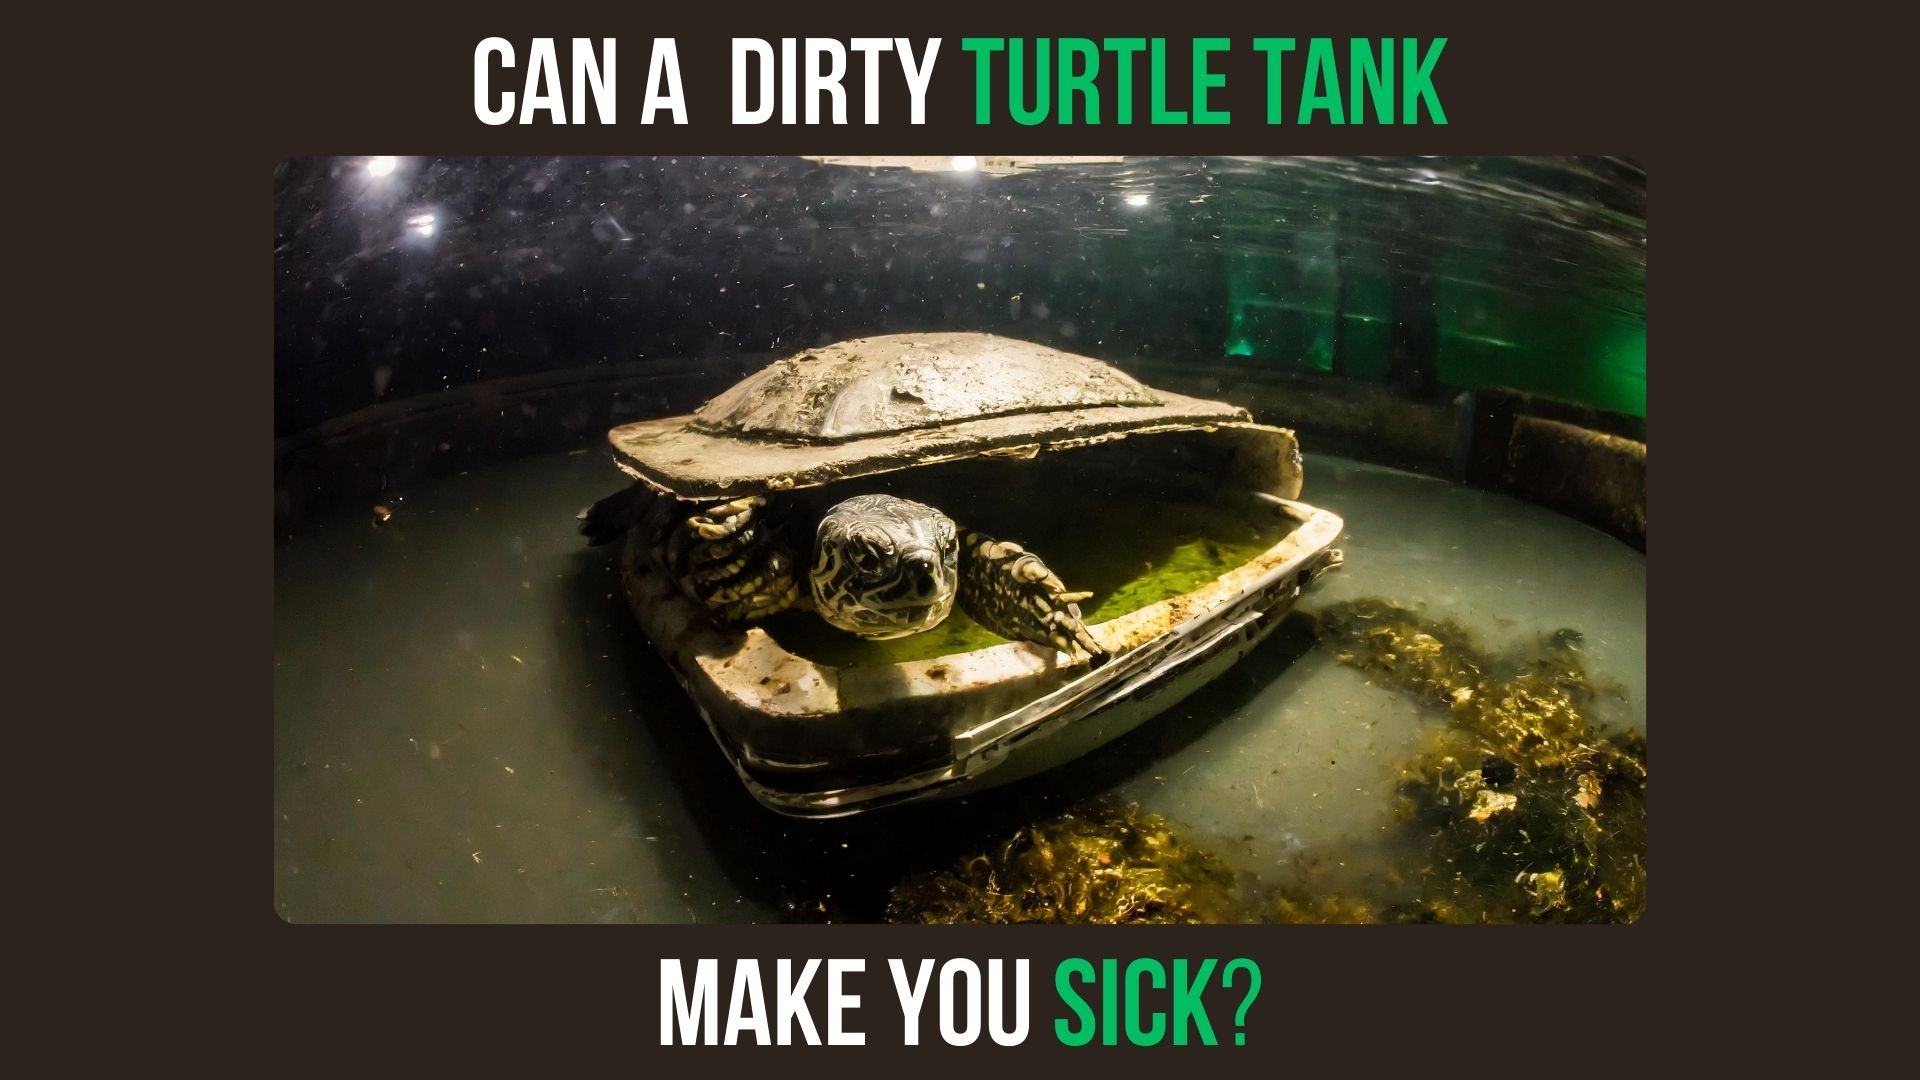 Can a Dirty Turtle Tank Make You Sick